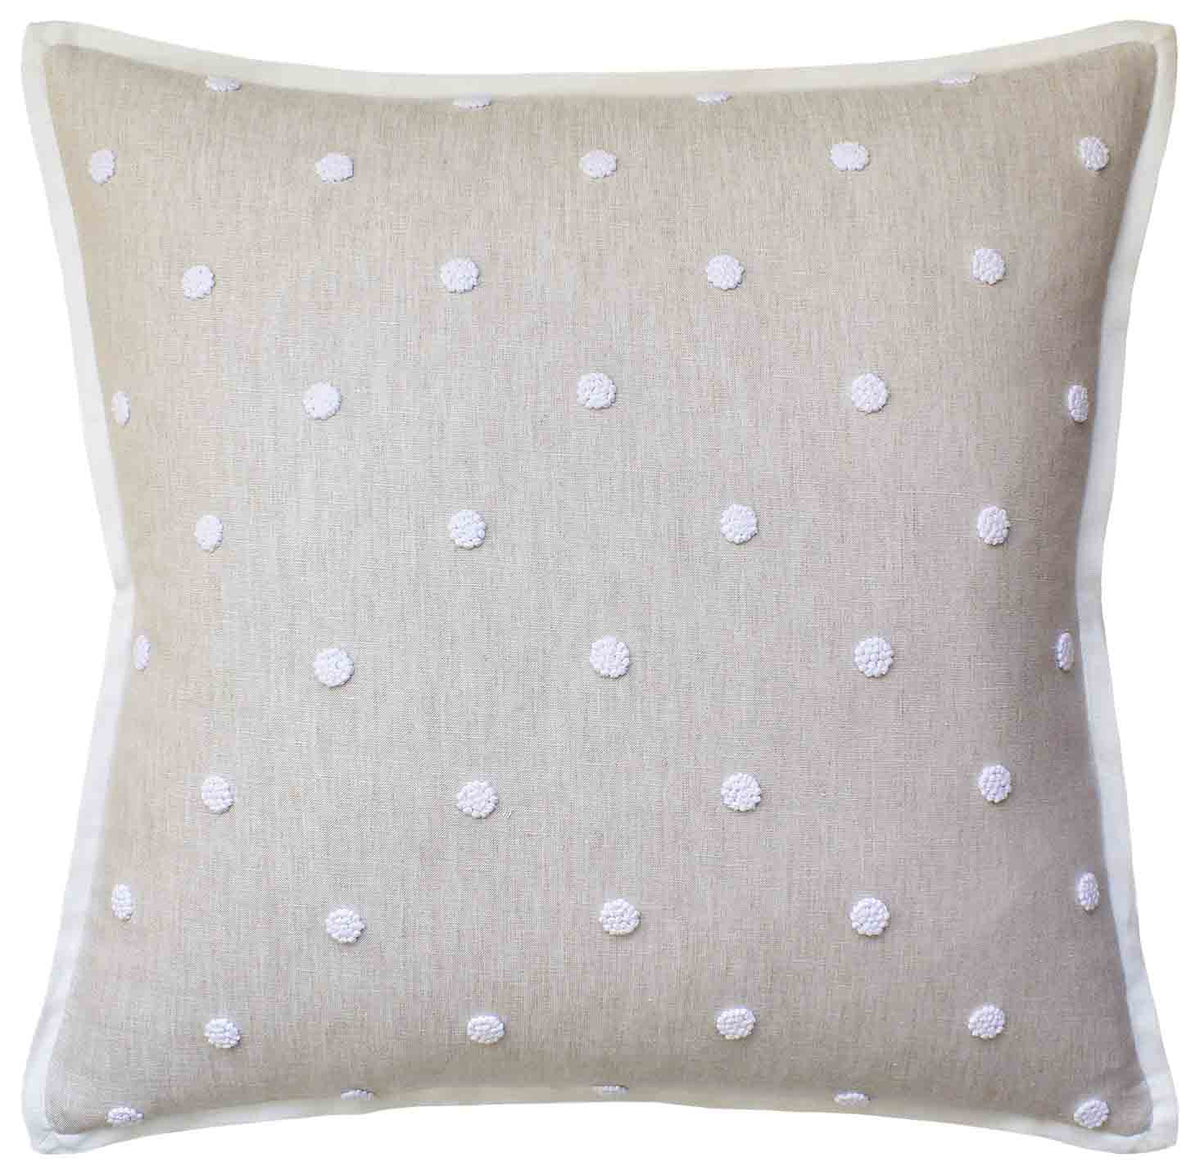 French Knot Embroidery Throw Pillow - 22x22 Flax